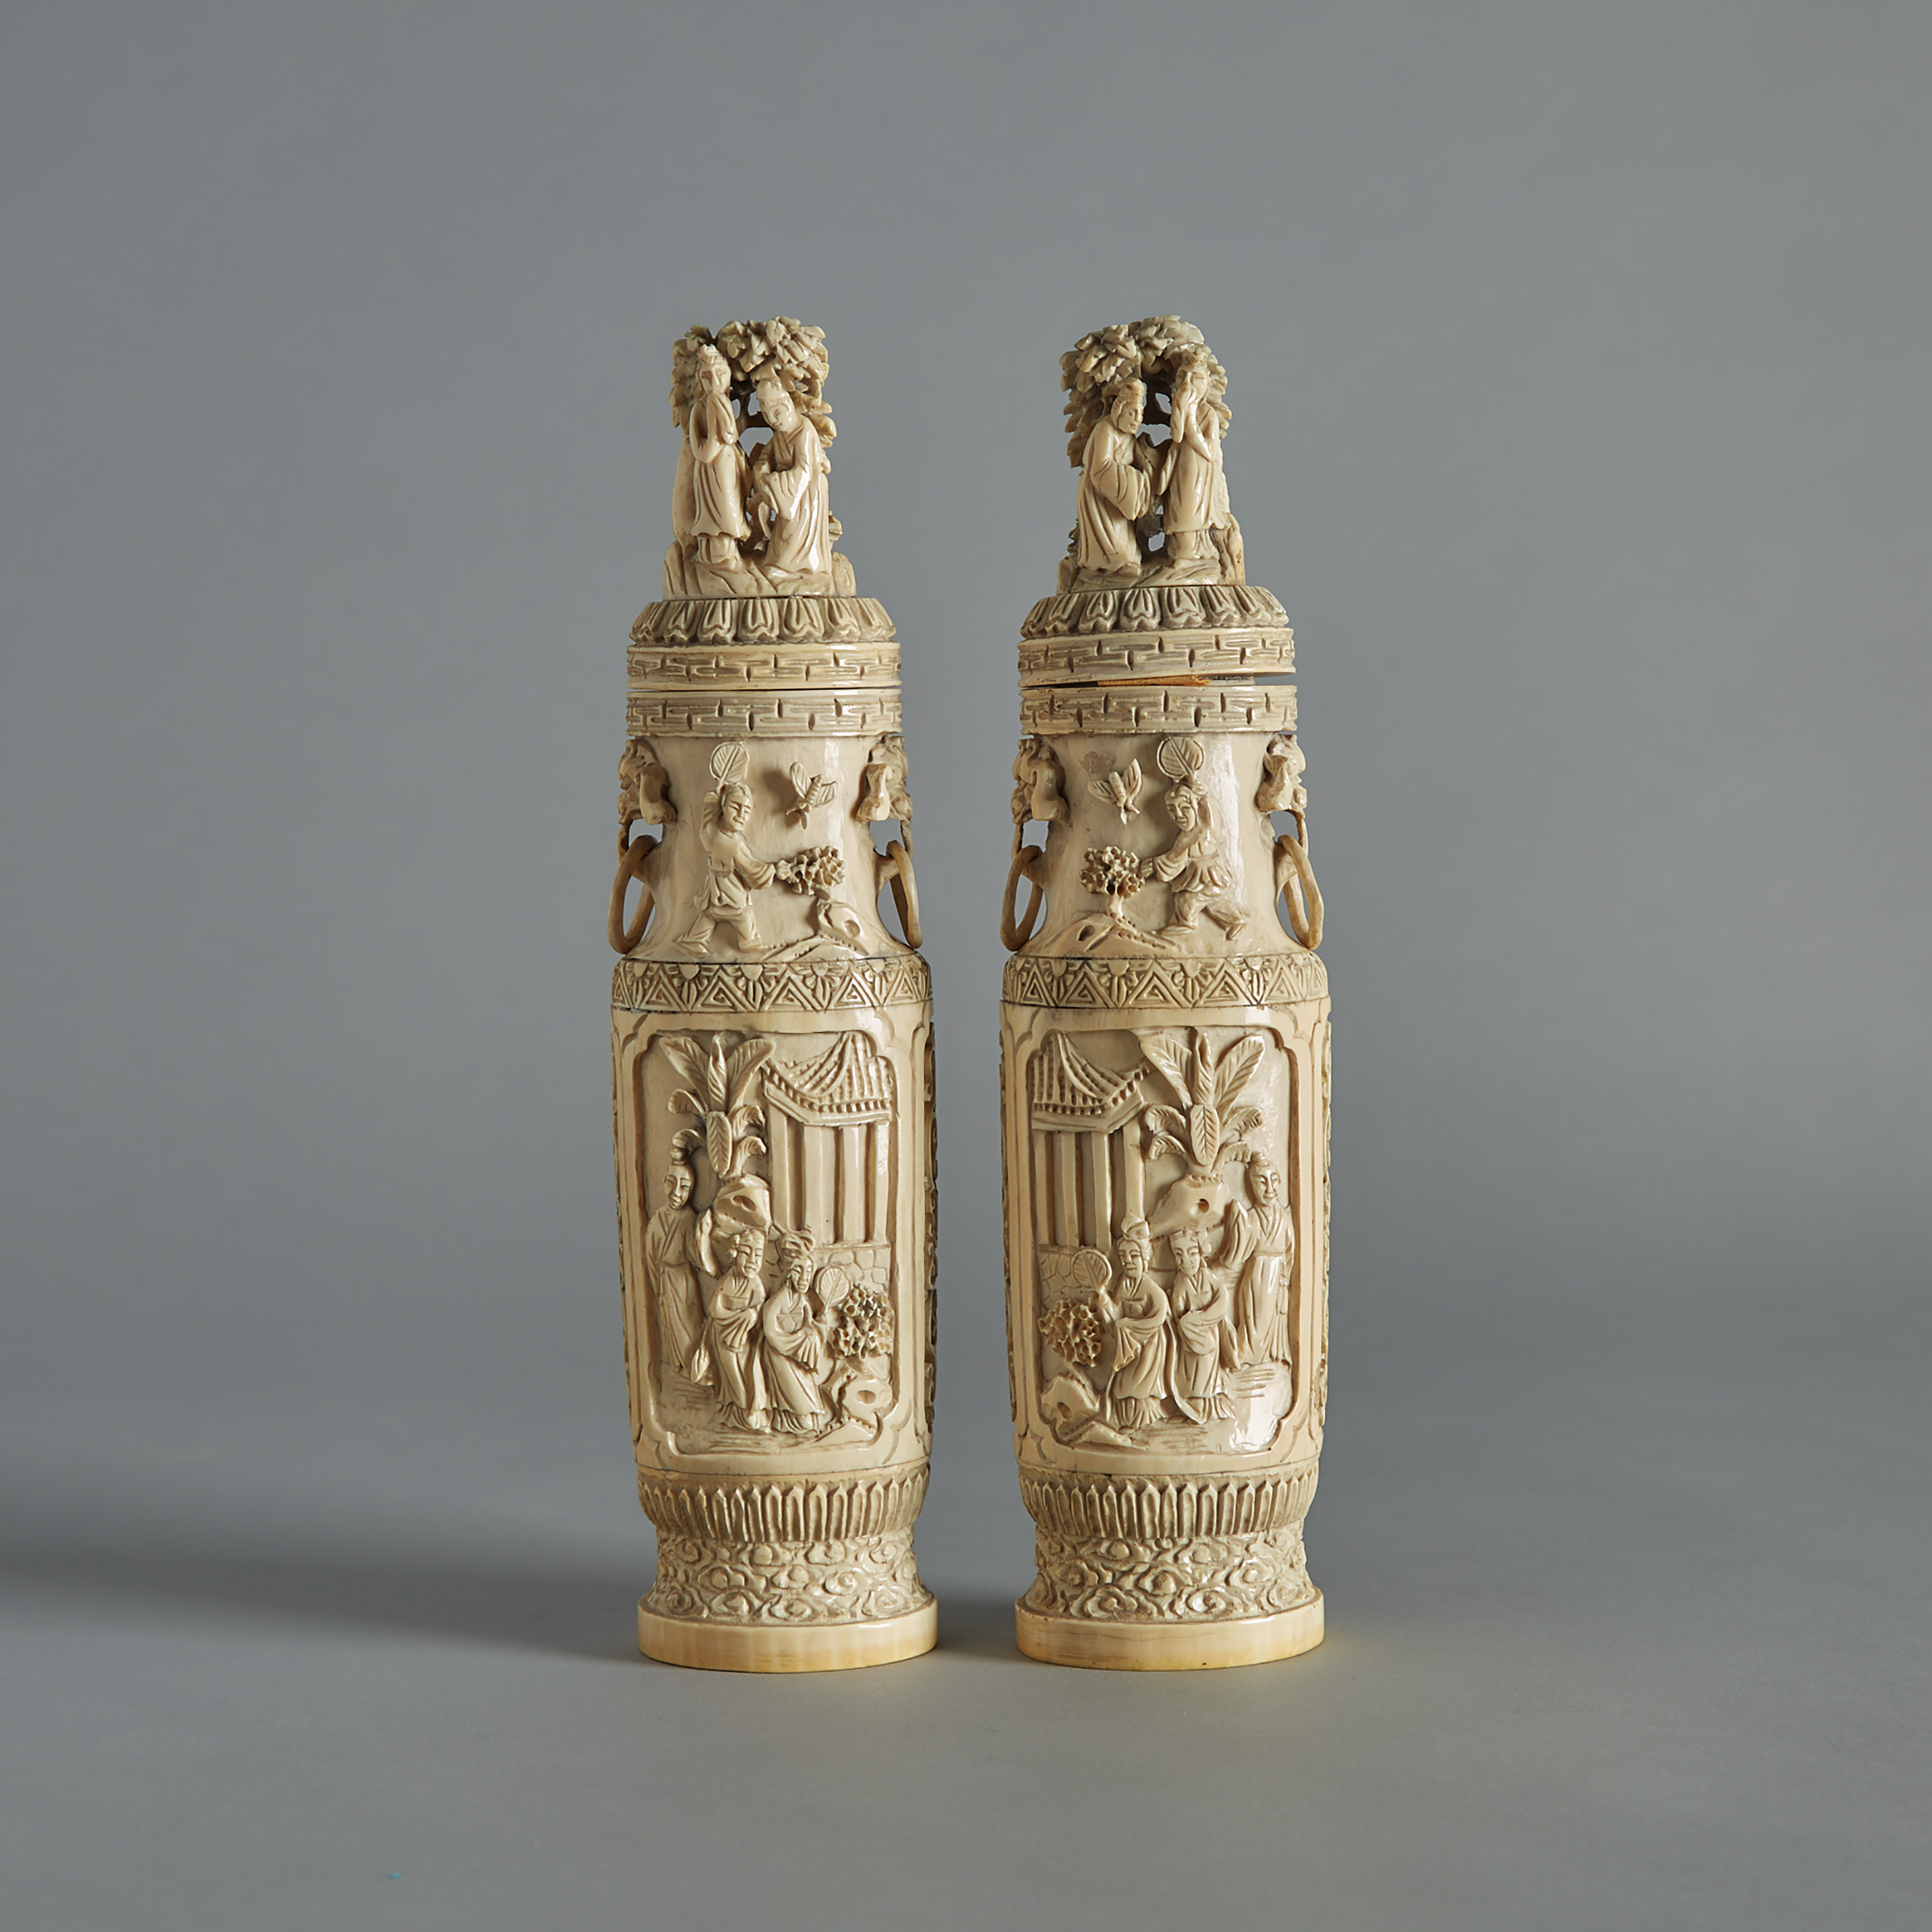 A Pair of Ivory Carved Vases, Circa 1900